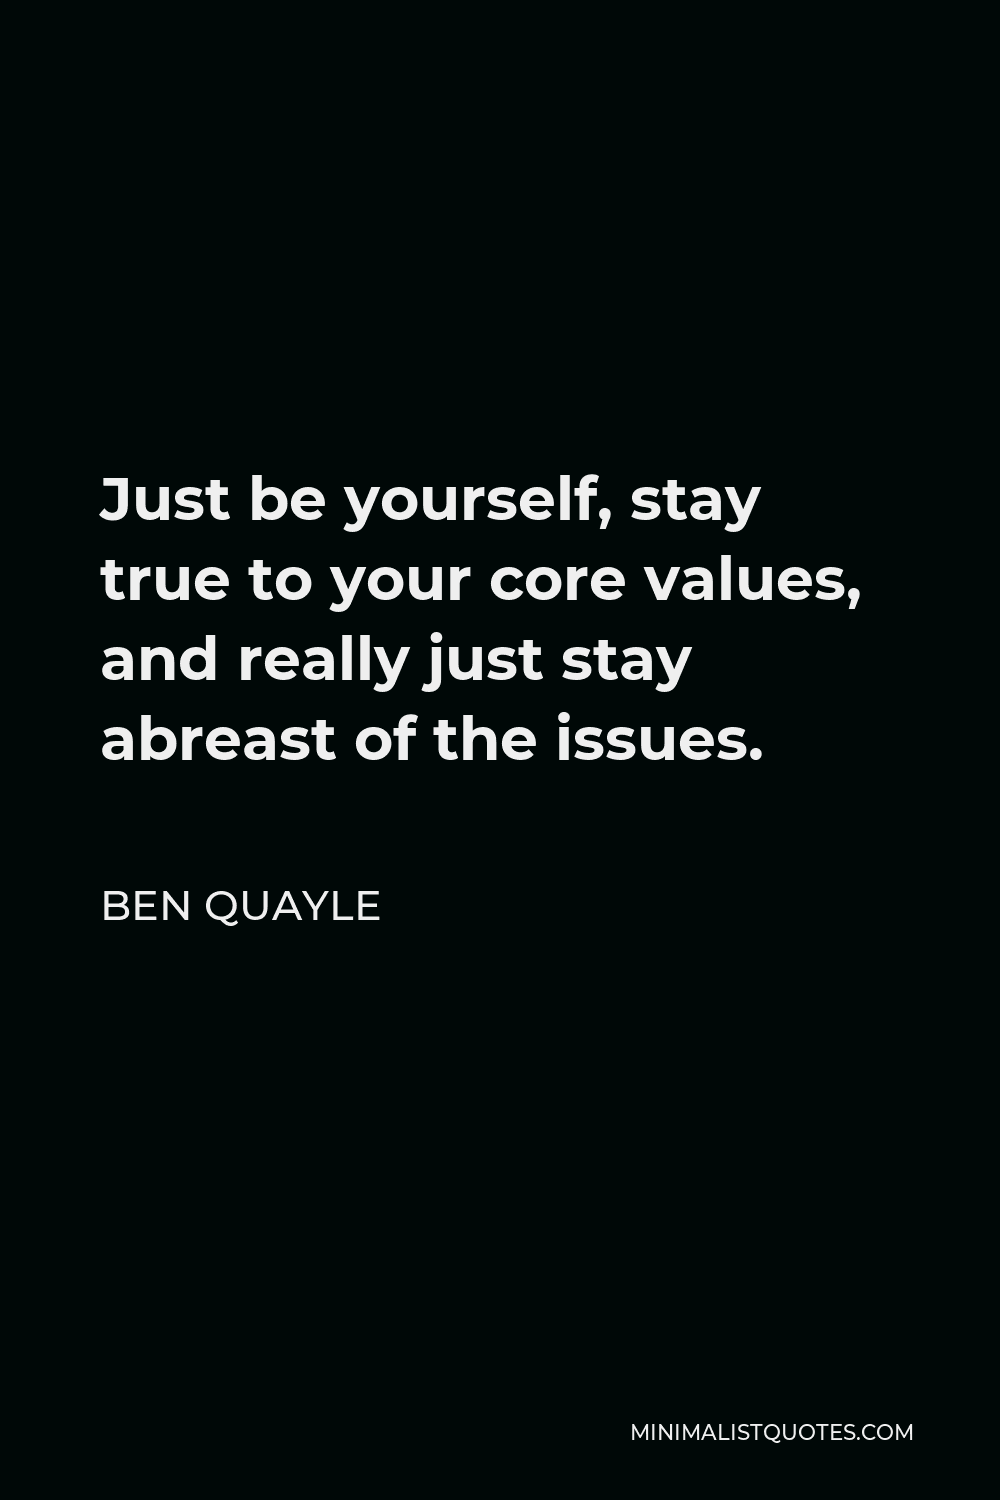 Ben Quayle Quote - Just be yourself, stay true to your core values, and really just stay abreast of the issues.